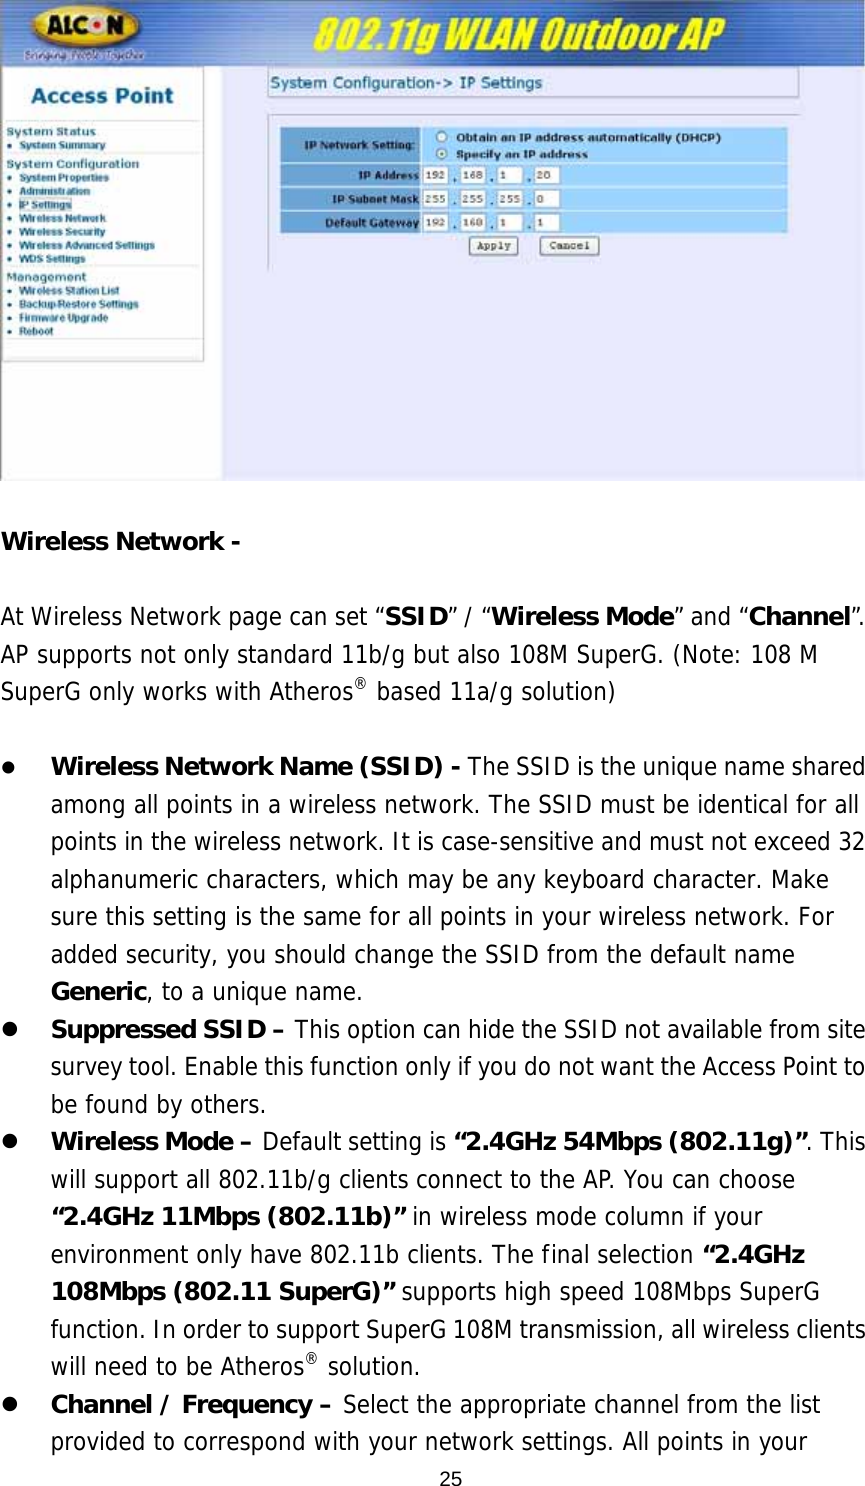   Wireless Network -    At Wireless Network page can set “SSID” / “Wireless Mode” and “Channel”. AP supports not only standard 11b/g but also 108M SuperG. (Note: 108 M SuperG only works with Atheros® based 11a/g solution)  z Wireless Network Name (SSID) - The SSID is the unique name shared among all points in a wireless network. The SSID must be identical for all points in the wireless network. It is case-sensitive and must not exceed 32 alphanumeric characters, which may be any keyboard character. Make sure this setting is the same for all points in your wireless network. For added security, you should change the SSID from the default name Generic, to a unique name. z Suppressed SSID – This option can hide the SSID not available from site survey tool. Enable this function only if you do not want the Access Point to be found by others. z Wireless Mode – Default setting is “2.4GHz 54Mbps (802.11g)”. This will support all 802.11b/g clients connect to the AP. You can choose “2.4GHz 11Mbps (802.11b)” in wireless mode column if your environment only have 802.11b clients. The final selection “2.4GHz 108Mbps (802.11 SuperG)” supports high speed 108Mbps SuperG function. In order to support SuperG 108M transmission, all wireless clients will need to be Atheros® solution.  z Channel / Frequency – Select the appropriate channel from the list provided to correspond with your network settings. All points in your  25